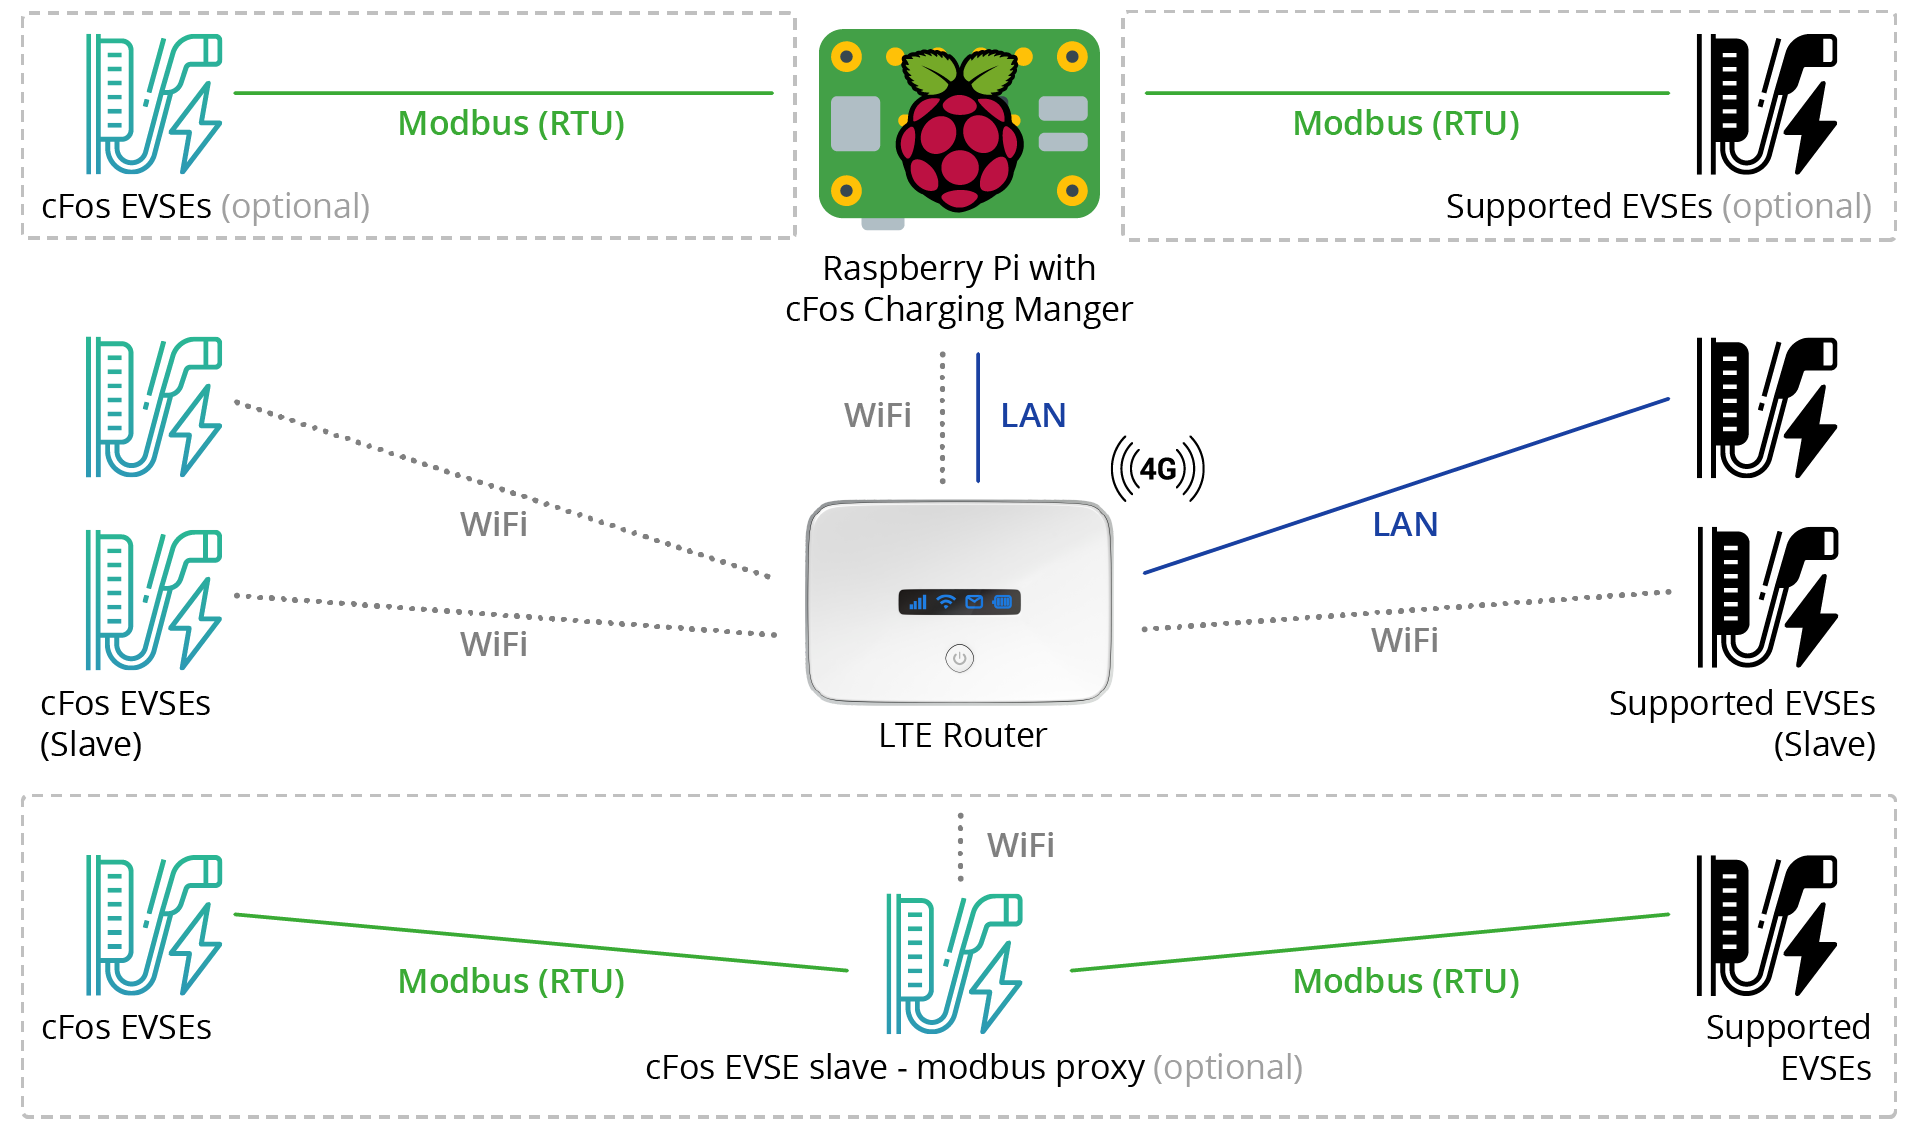 Graphic example setup with LTE router